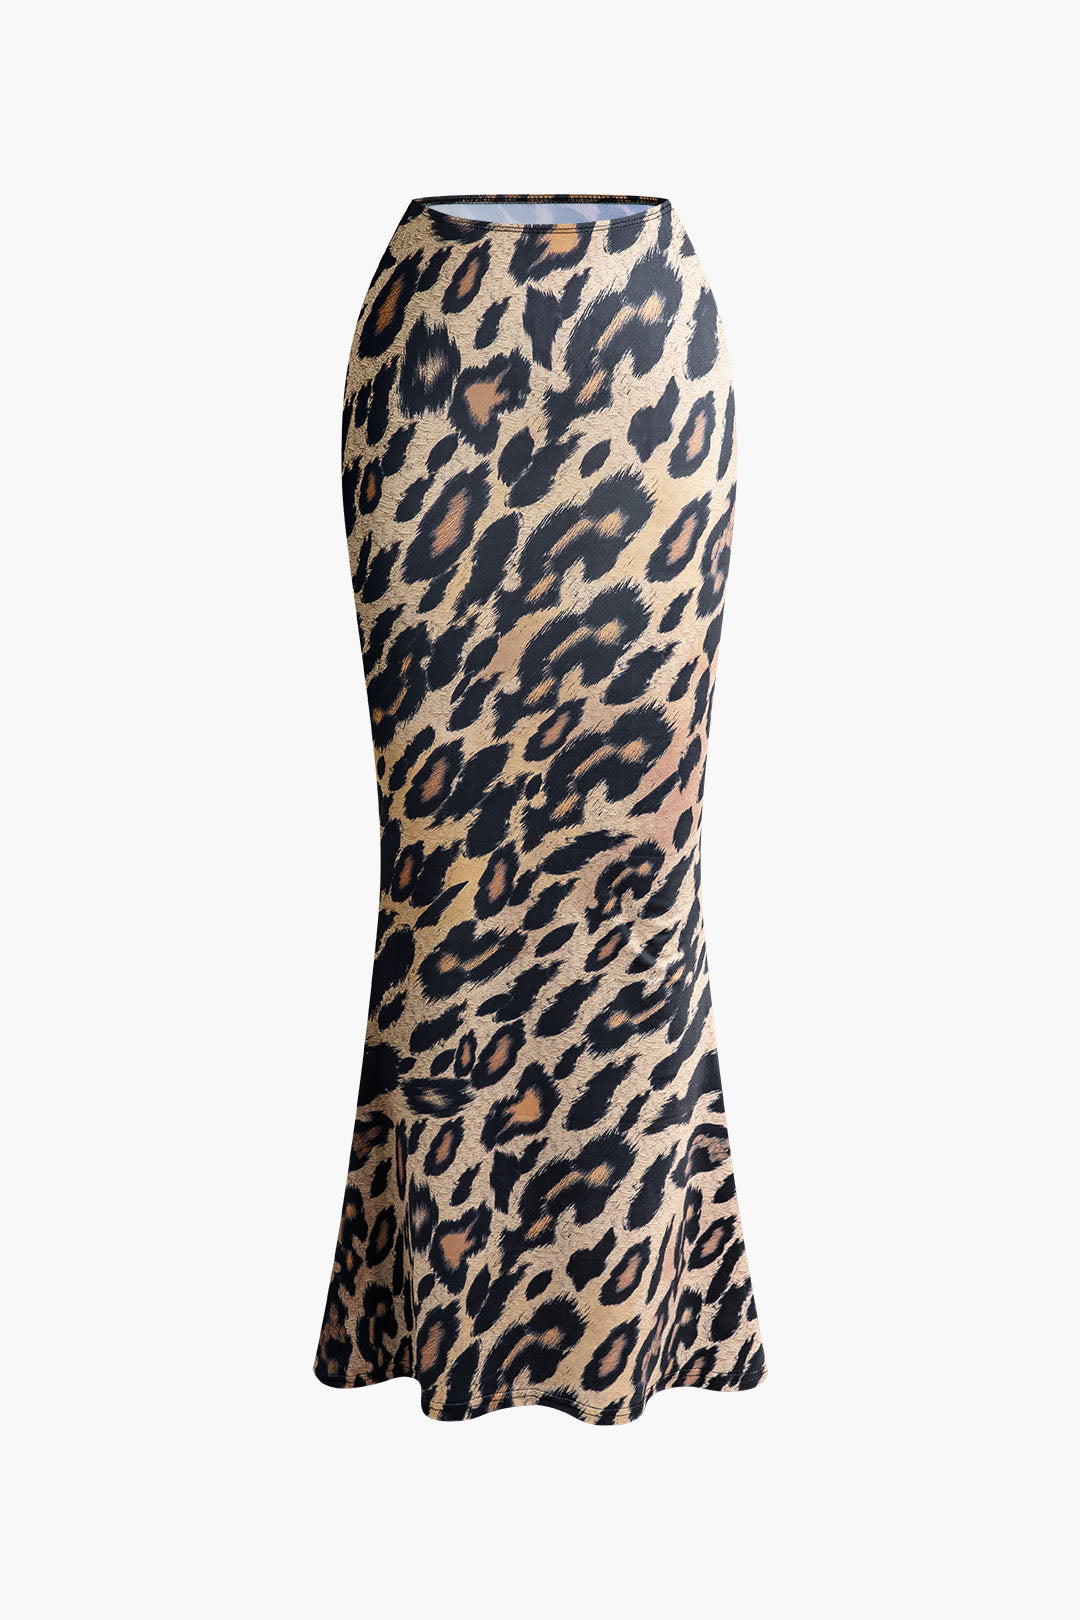 Leopard Print Tie Halter Backless Tank Top And Maxi Skirt Set